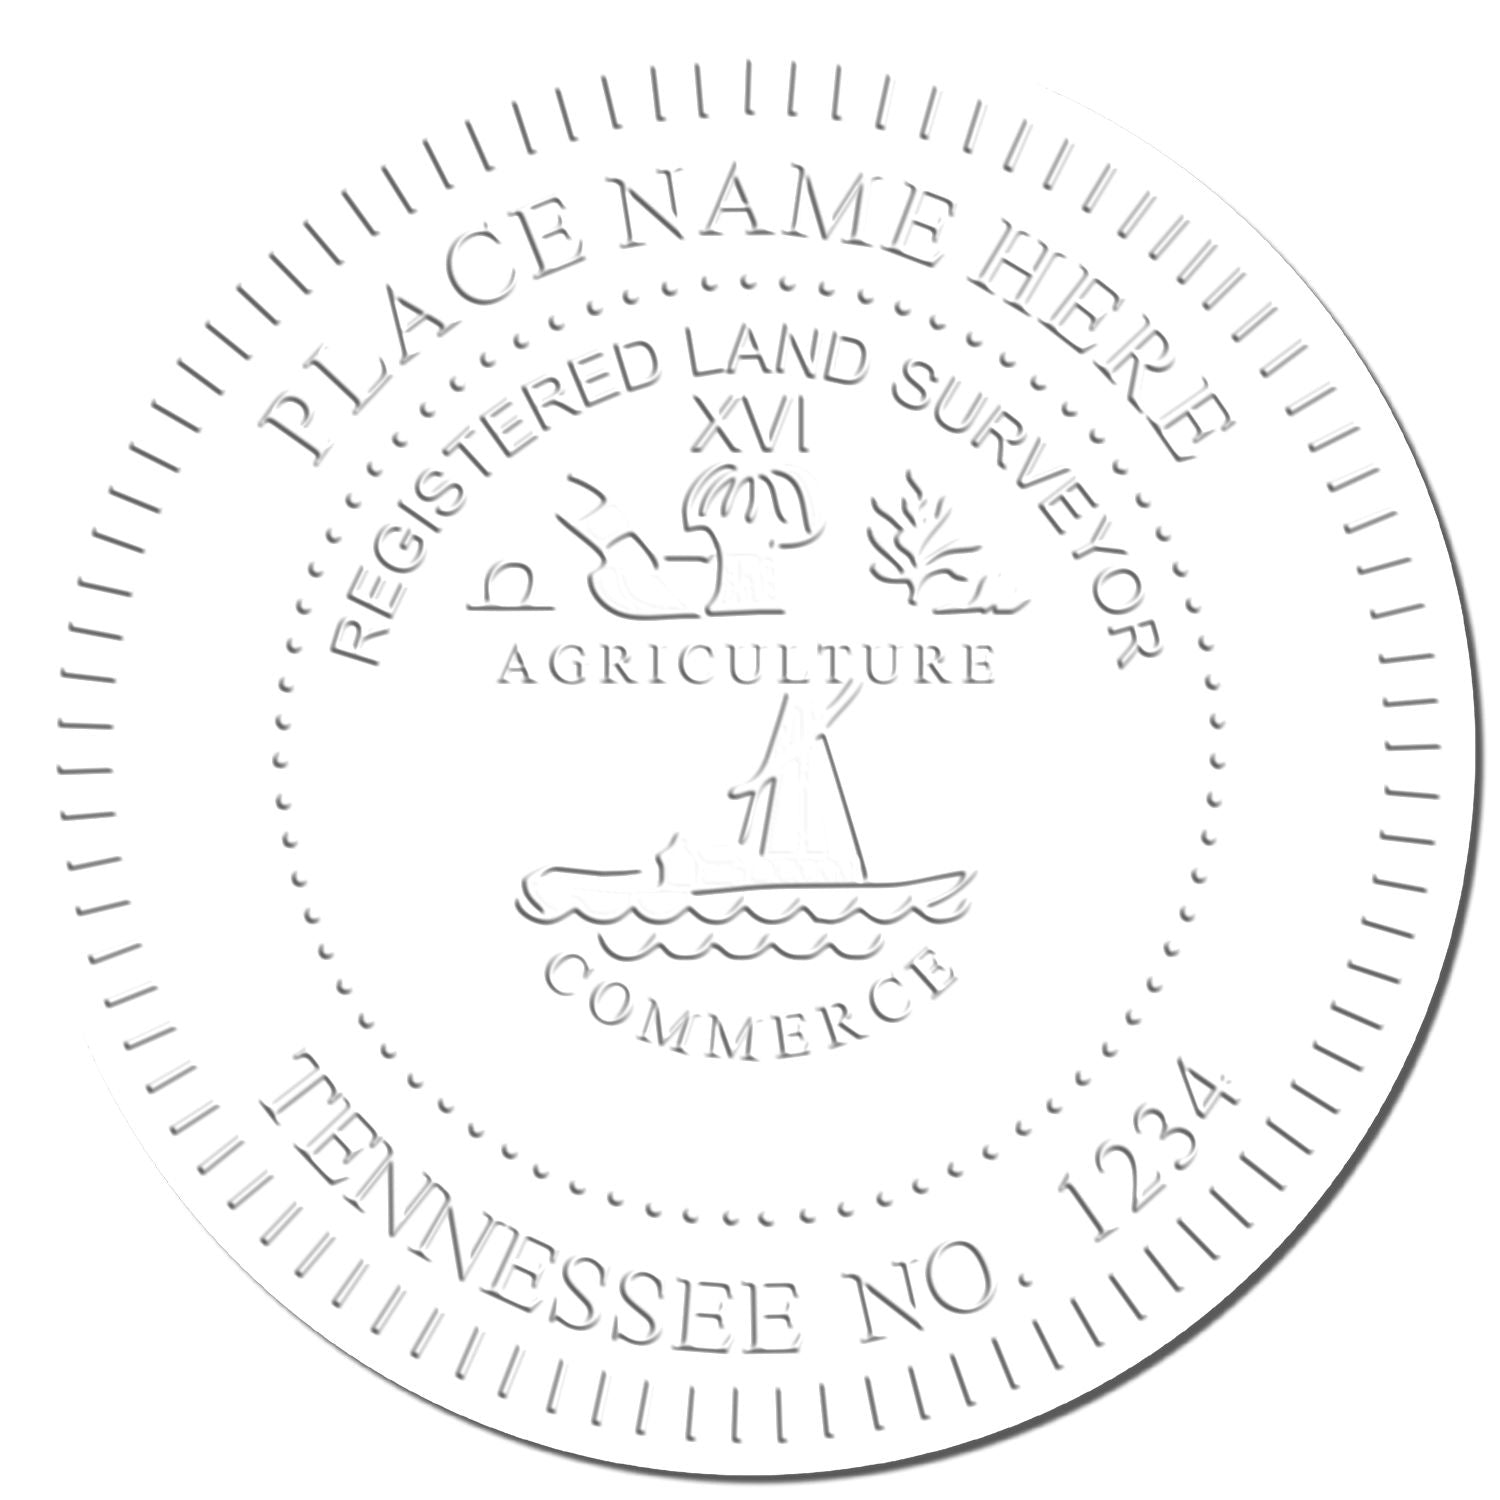 This paper is stamped with a sample imprint of the Handheld Tennessee Land Surveyor Seal, signifying its quality and reliability.